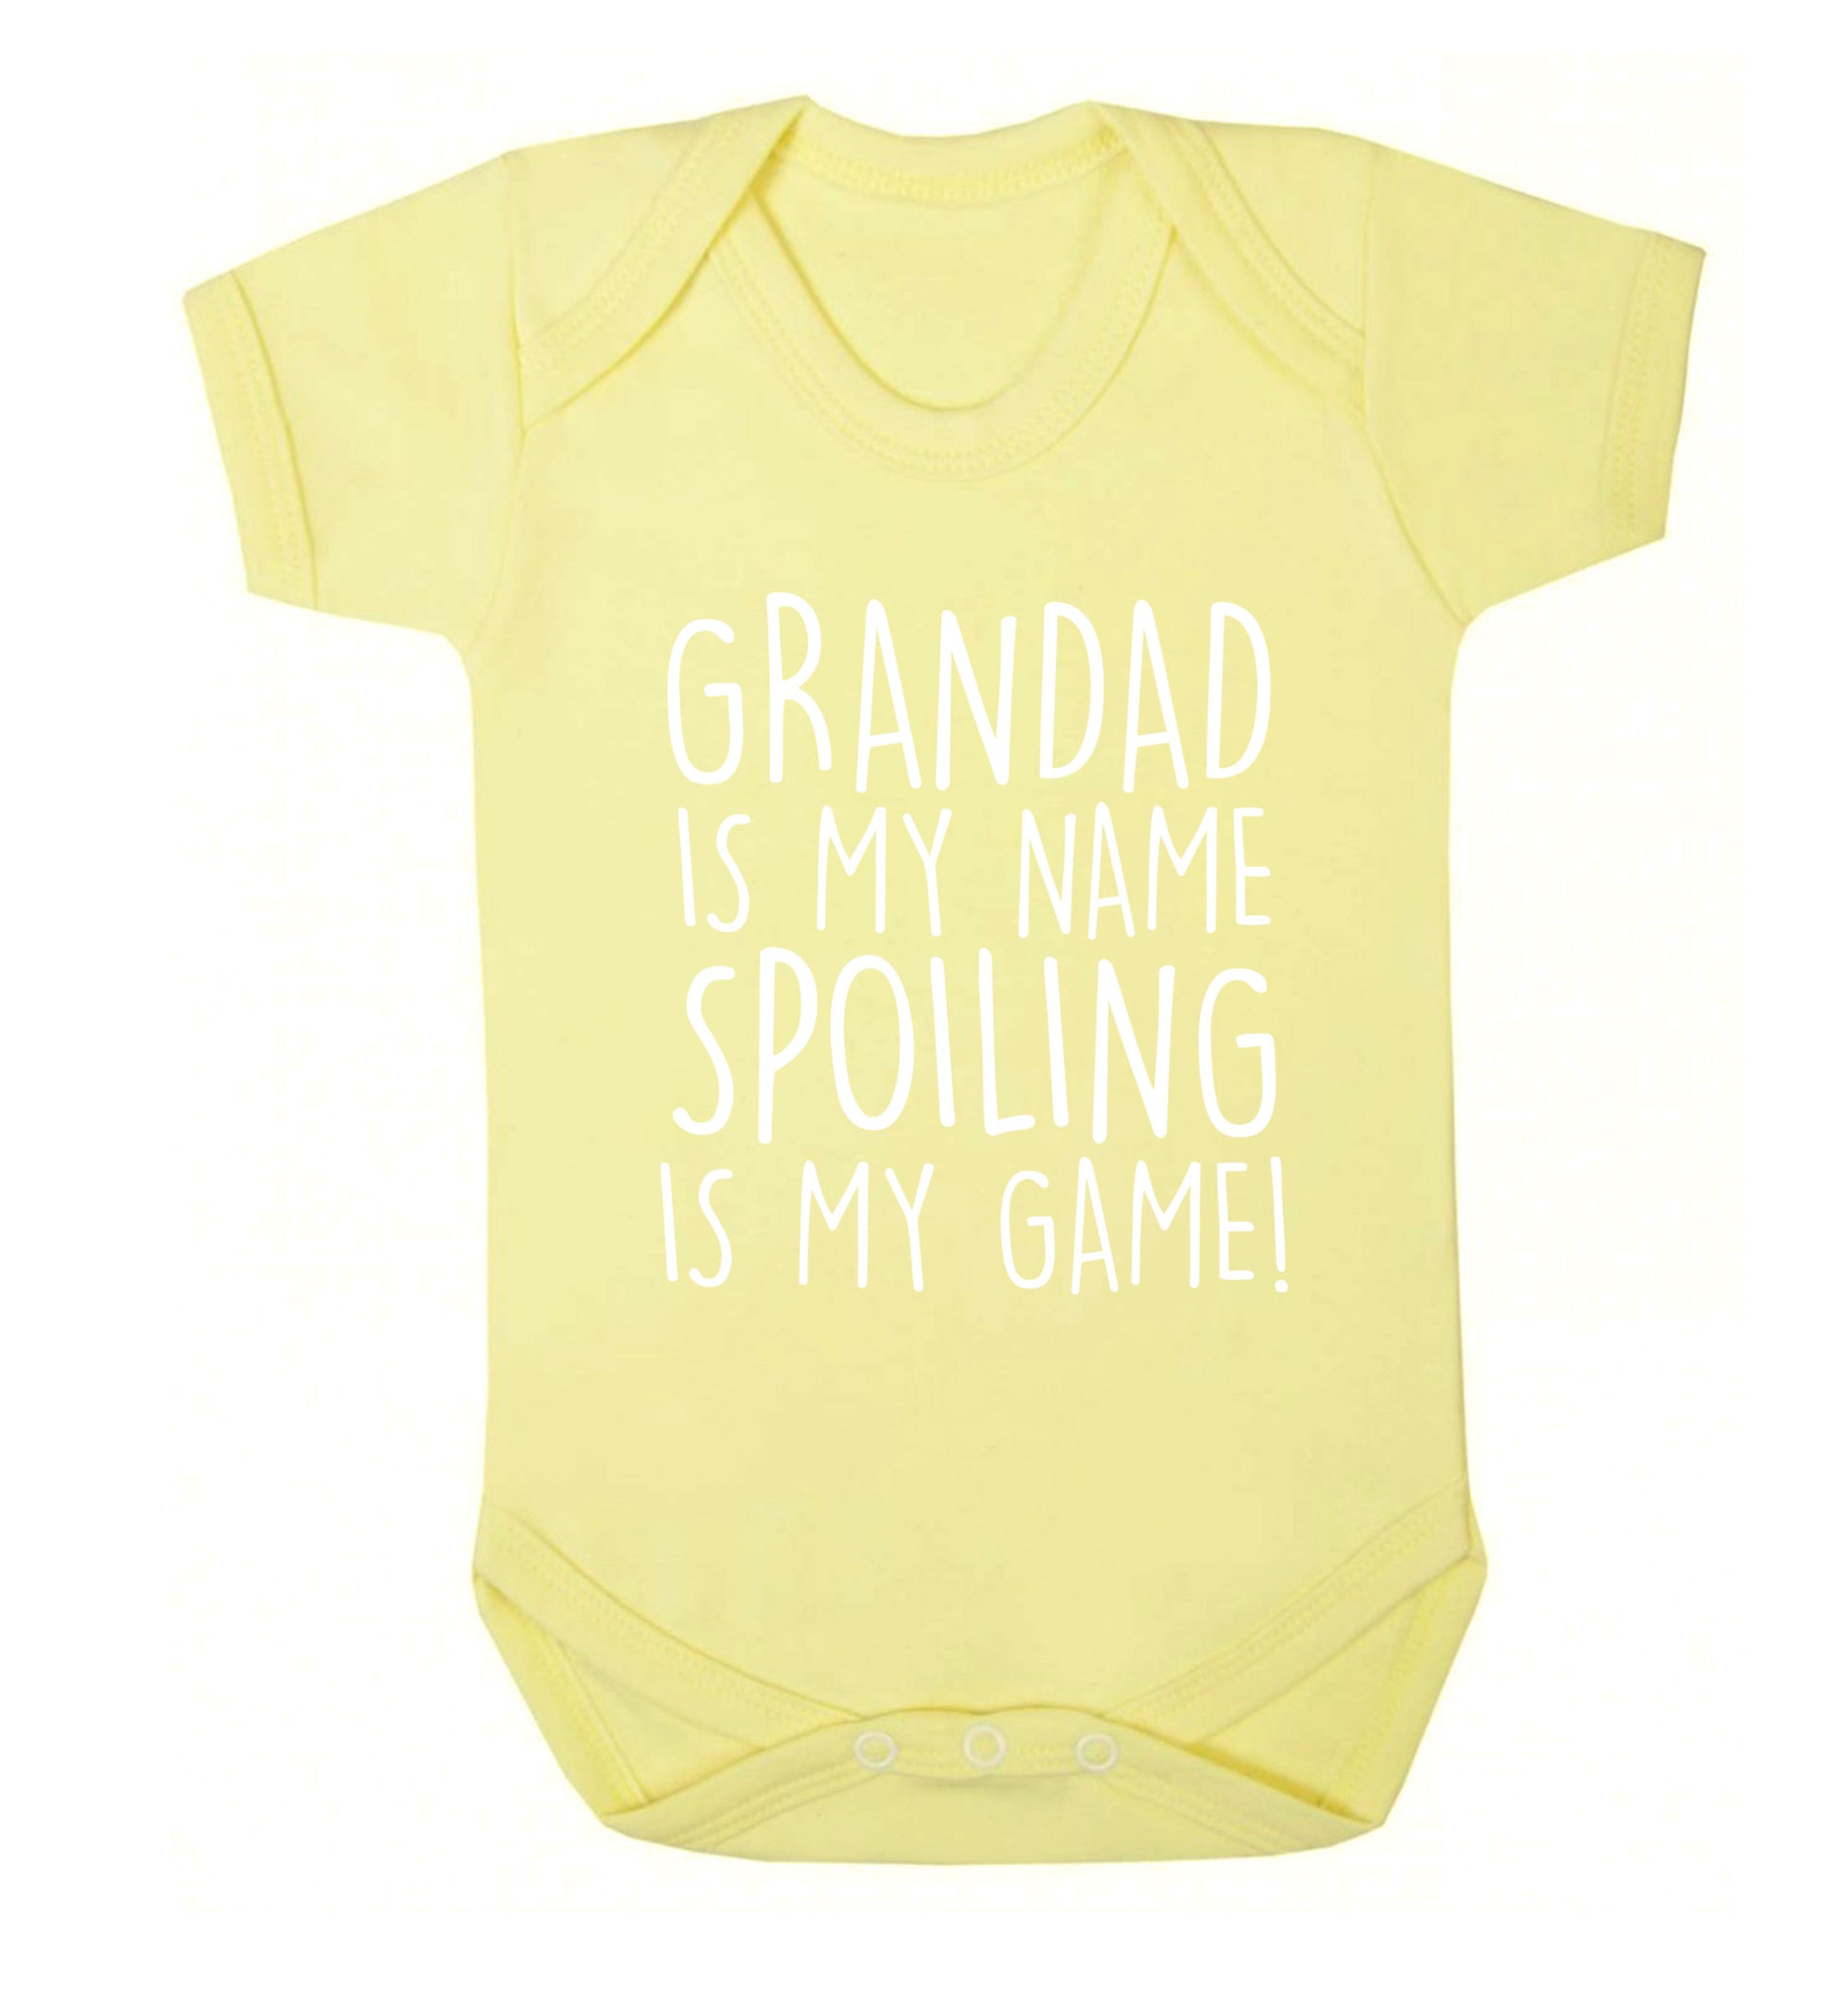 Grandad is my name, spoiling is my game Baby Vest pale yellow 18-24 months